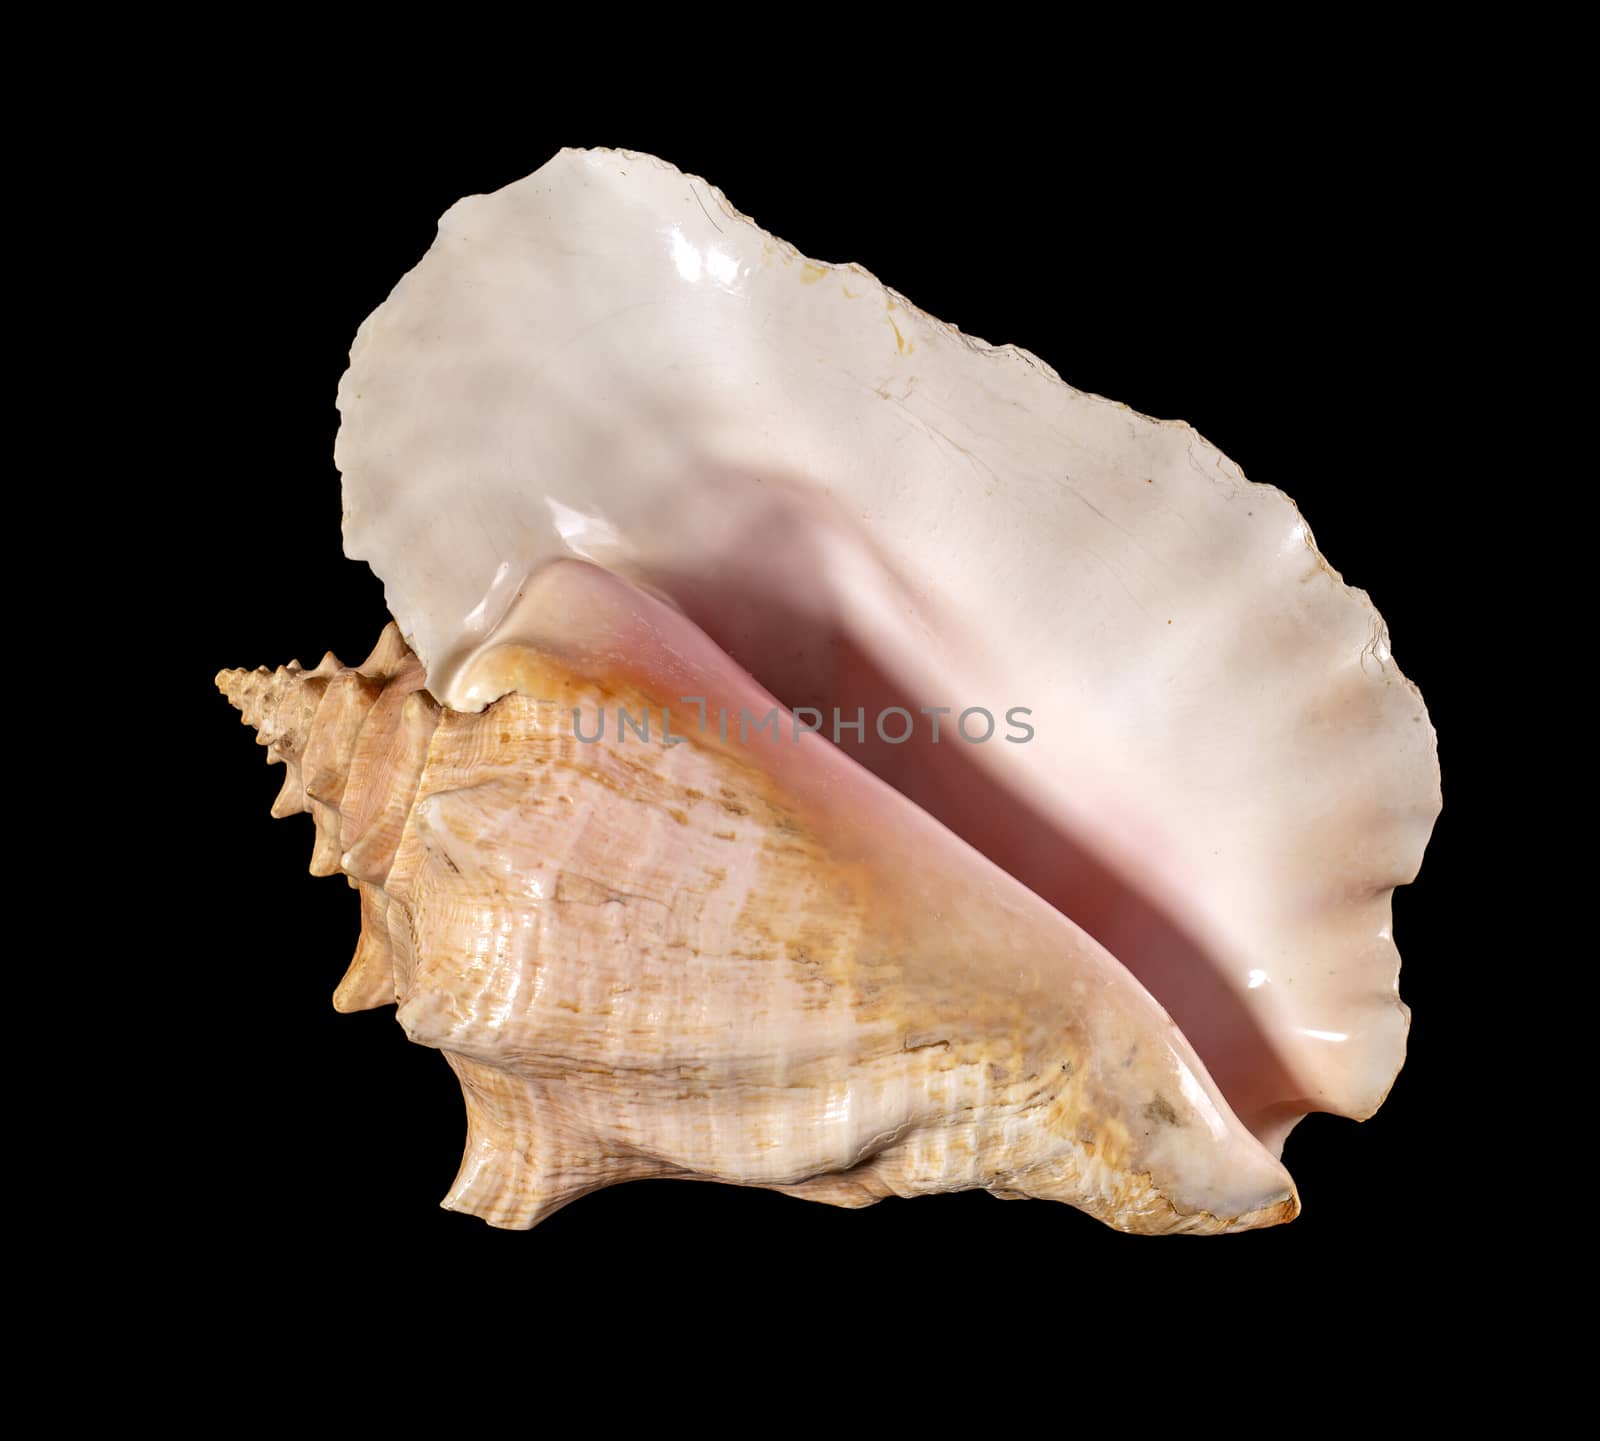 Sea shell isolated. Cassis cornuta, common name the horned helmet, is a species of extremely large sea snail, a marine gastropod mollusc in the family Cassidae, the helmet shells